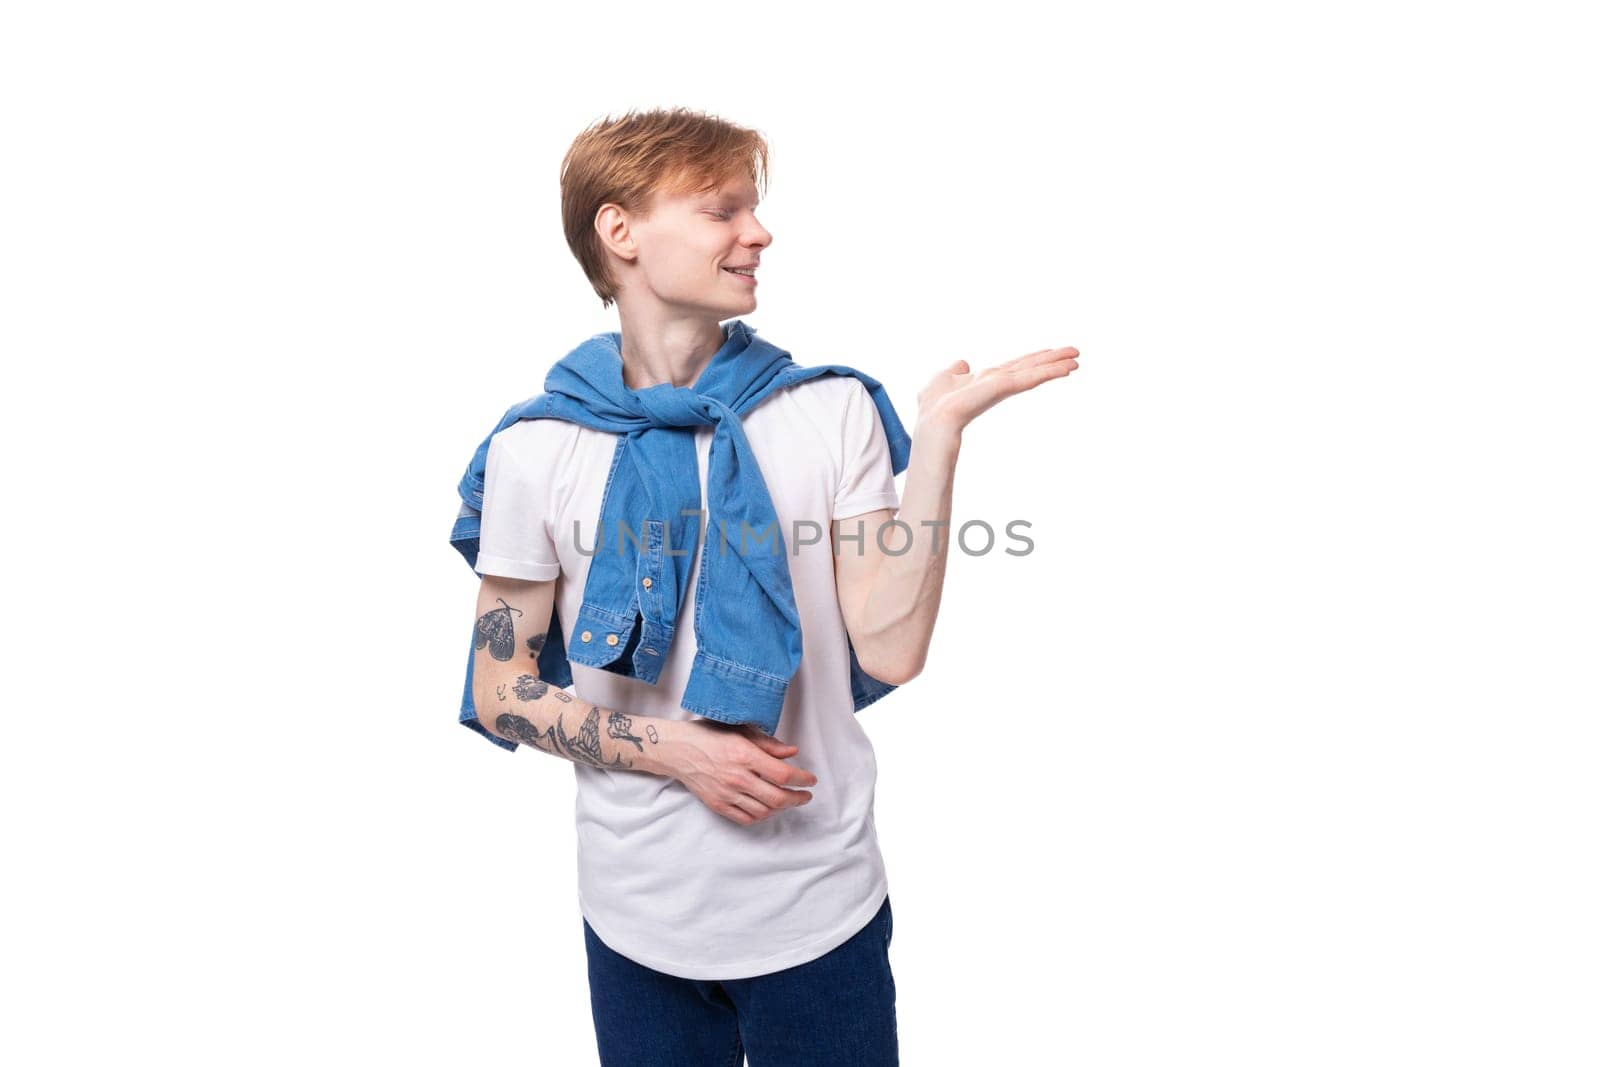 young cute caucasian guy with short red hair with a tattoo on his arms actively gesturing by TRMK